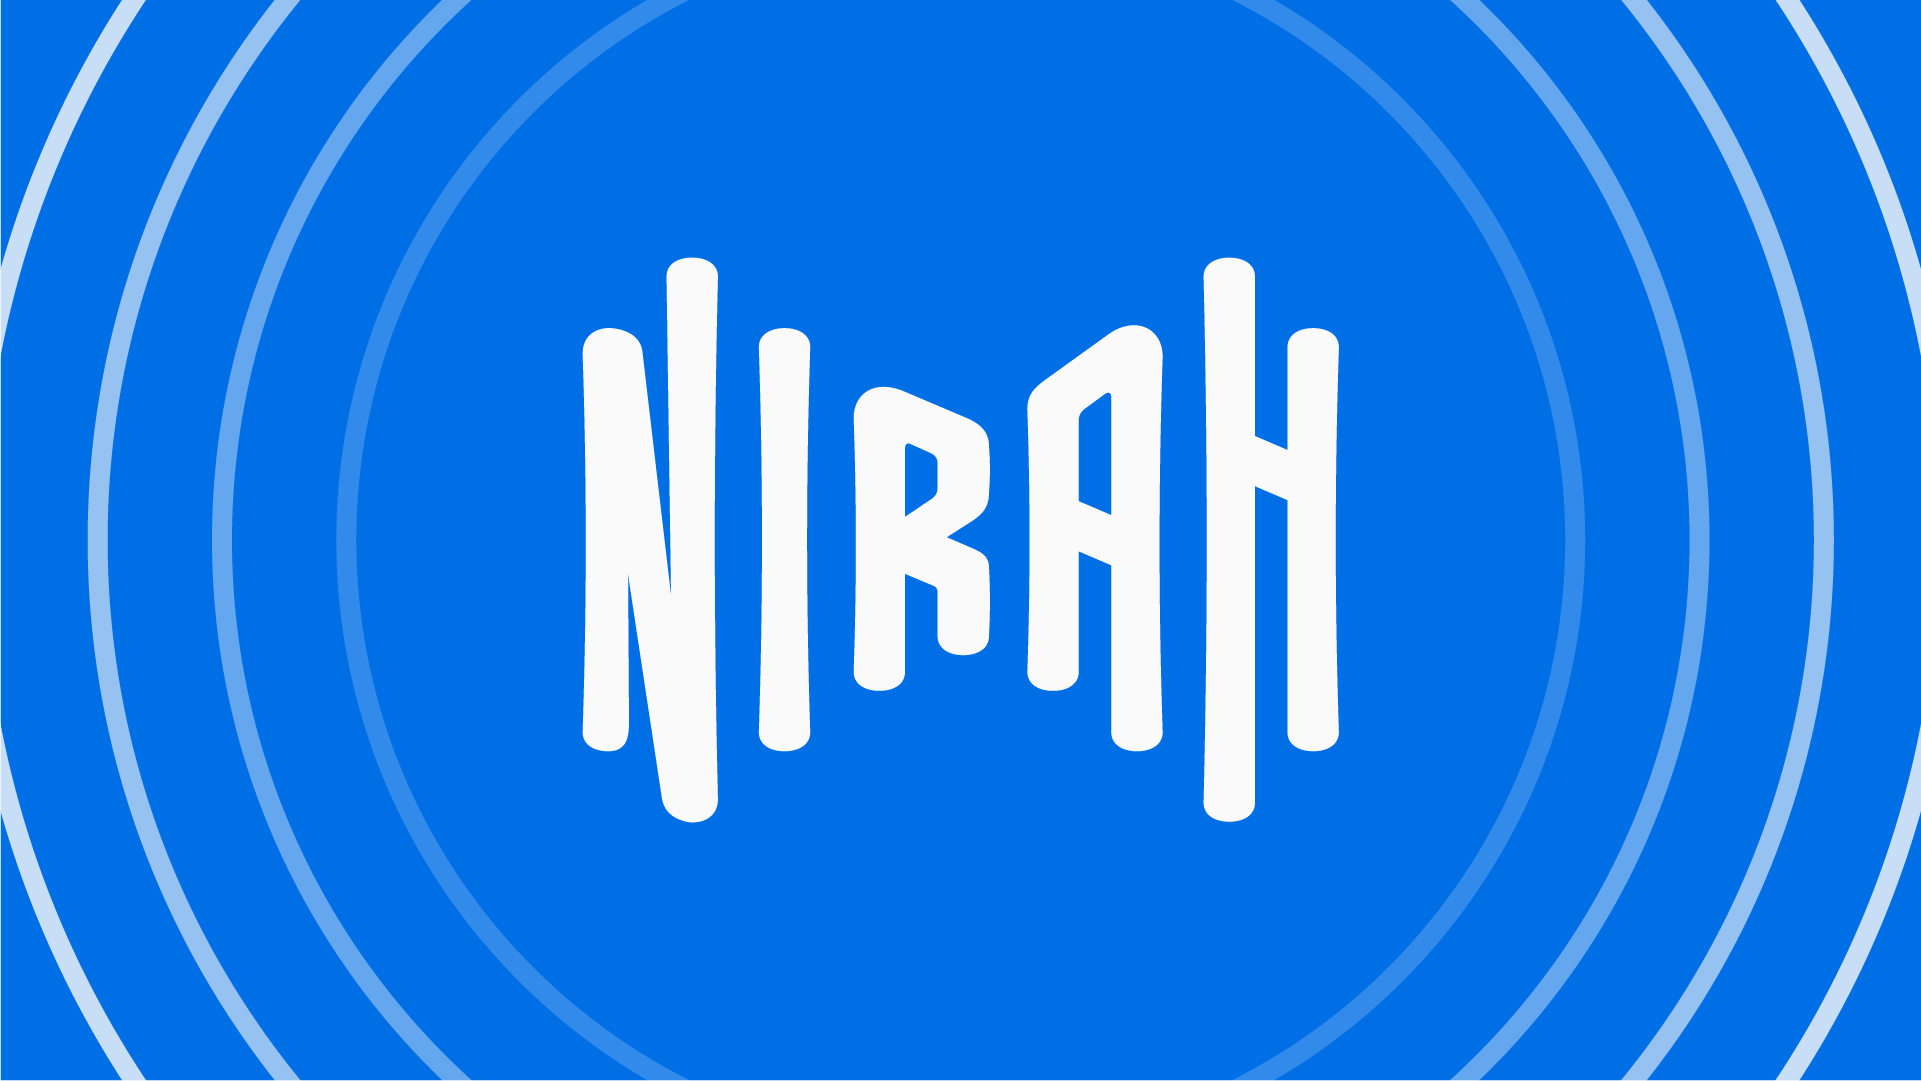 The Nirah logo with sound waves radiating from it.